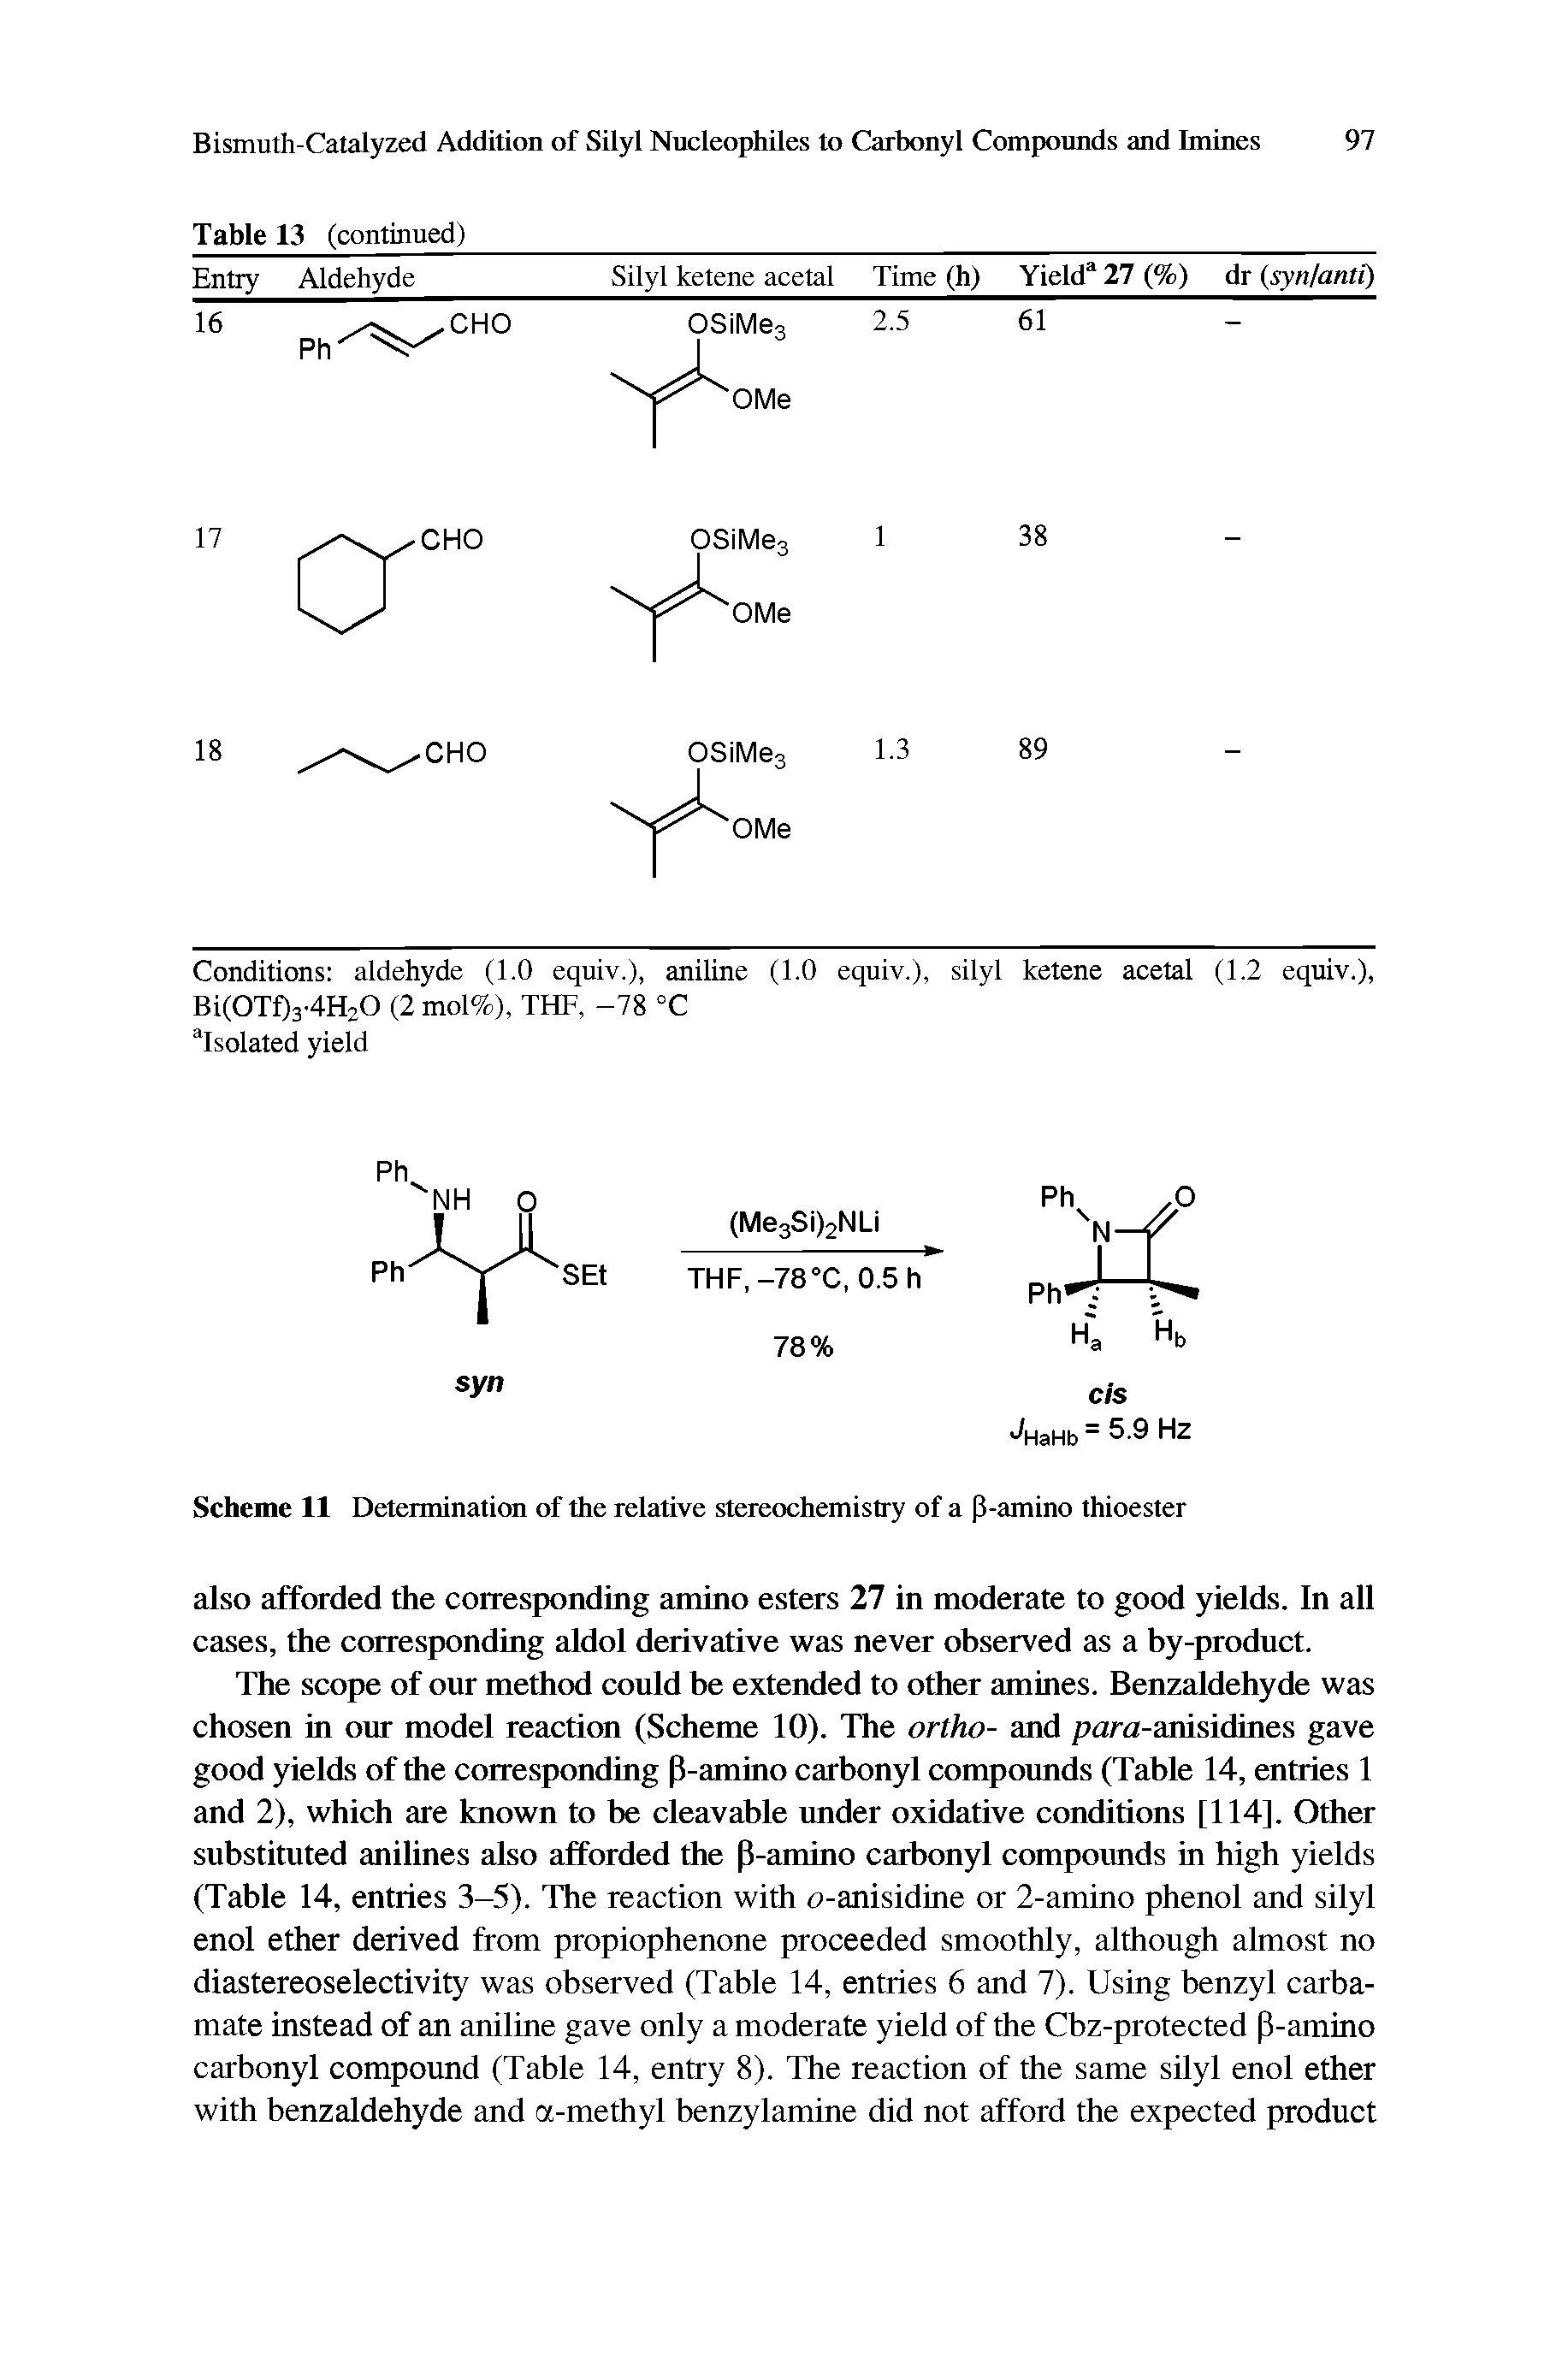 Scheme 11 Determination of the relative stereochemistry of a P-amino thioester...